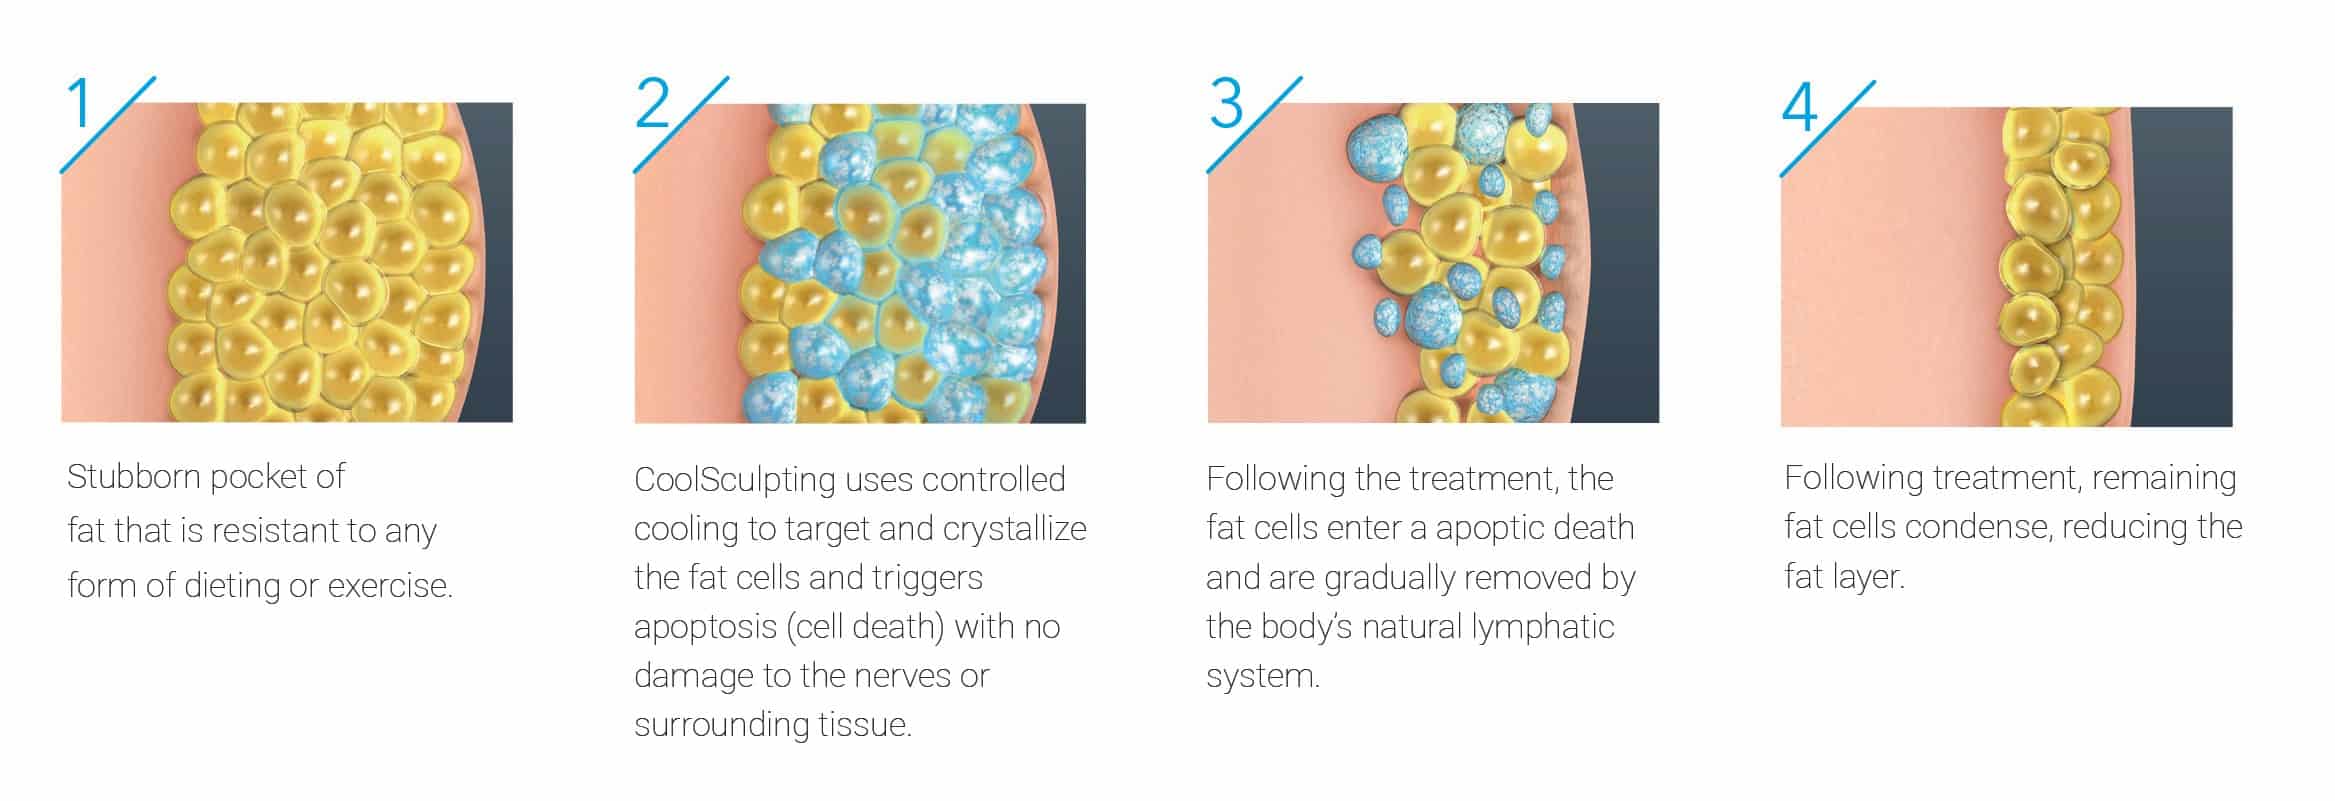 How Does CoolSculpting Work